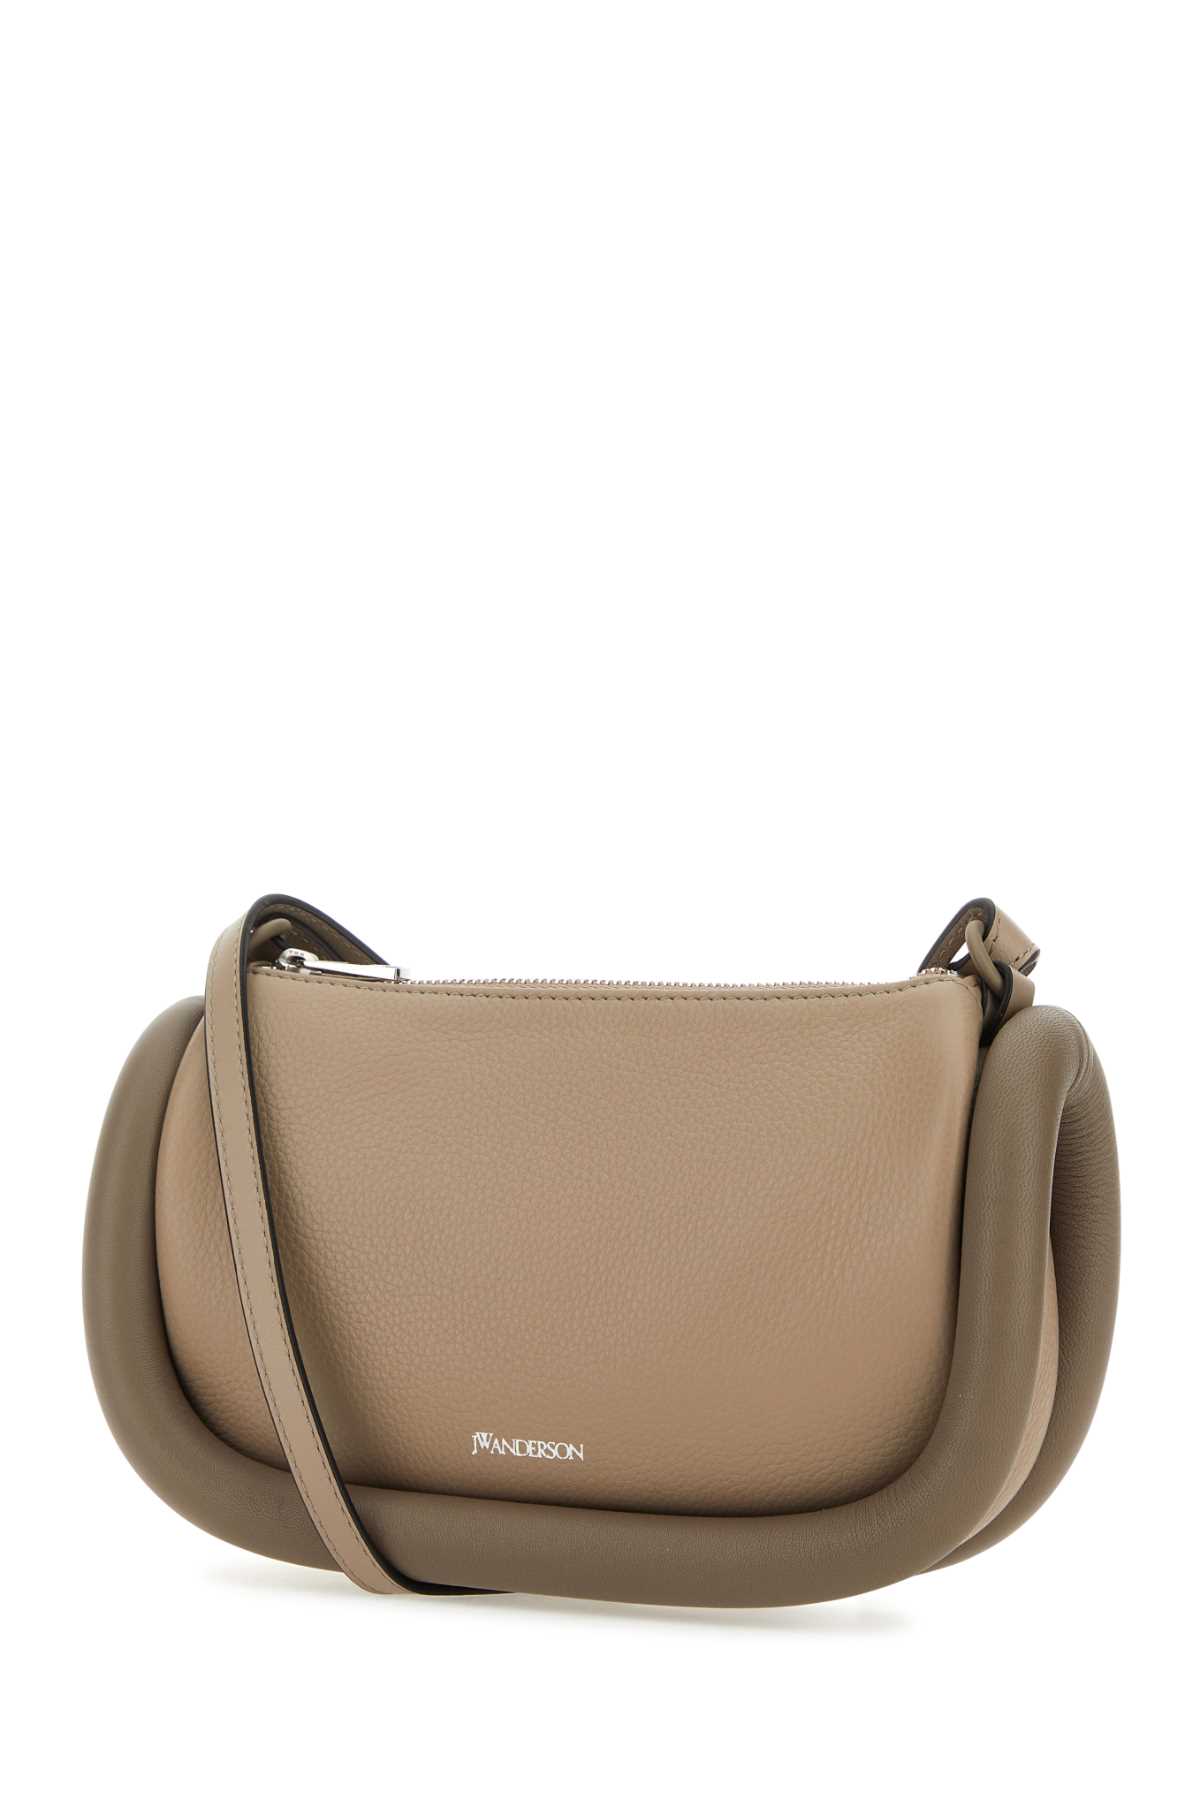 Jw Anderson Taupe Bumper-12 Leather Crossbody Bag